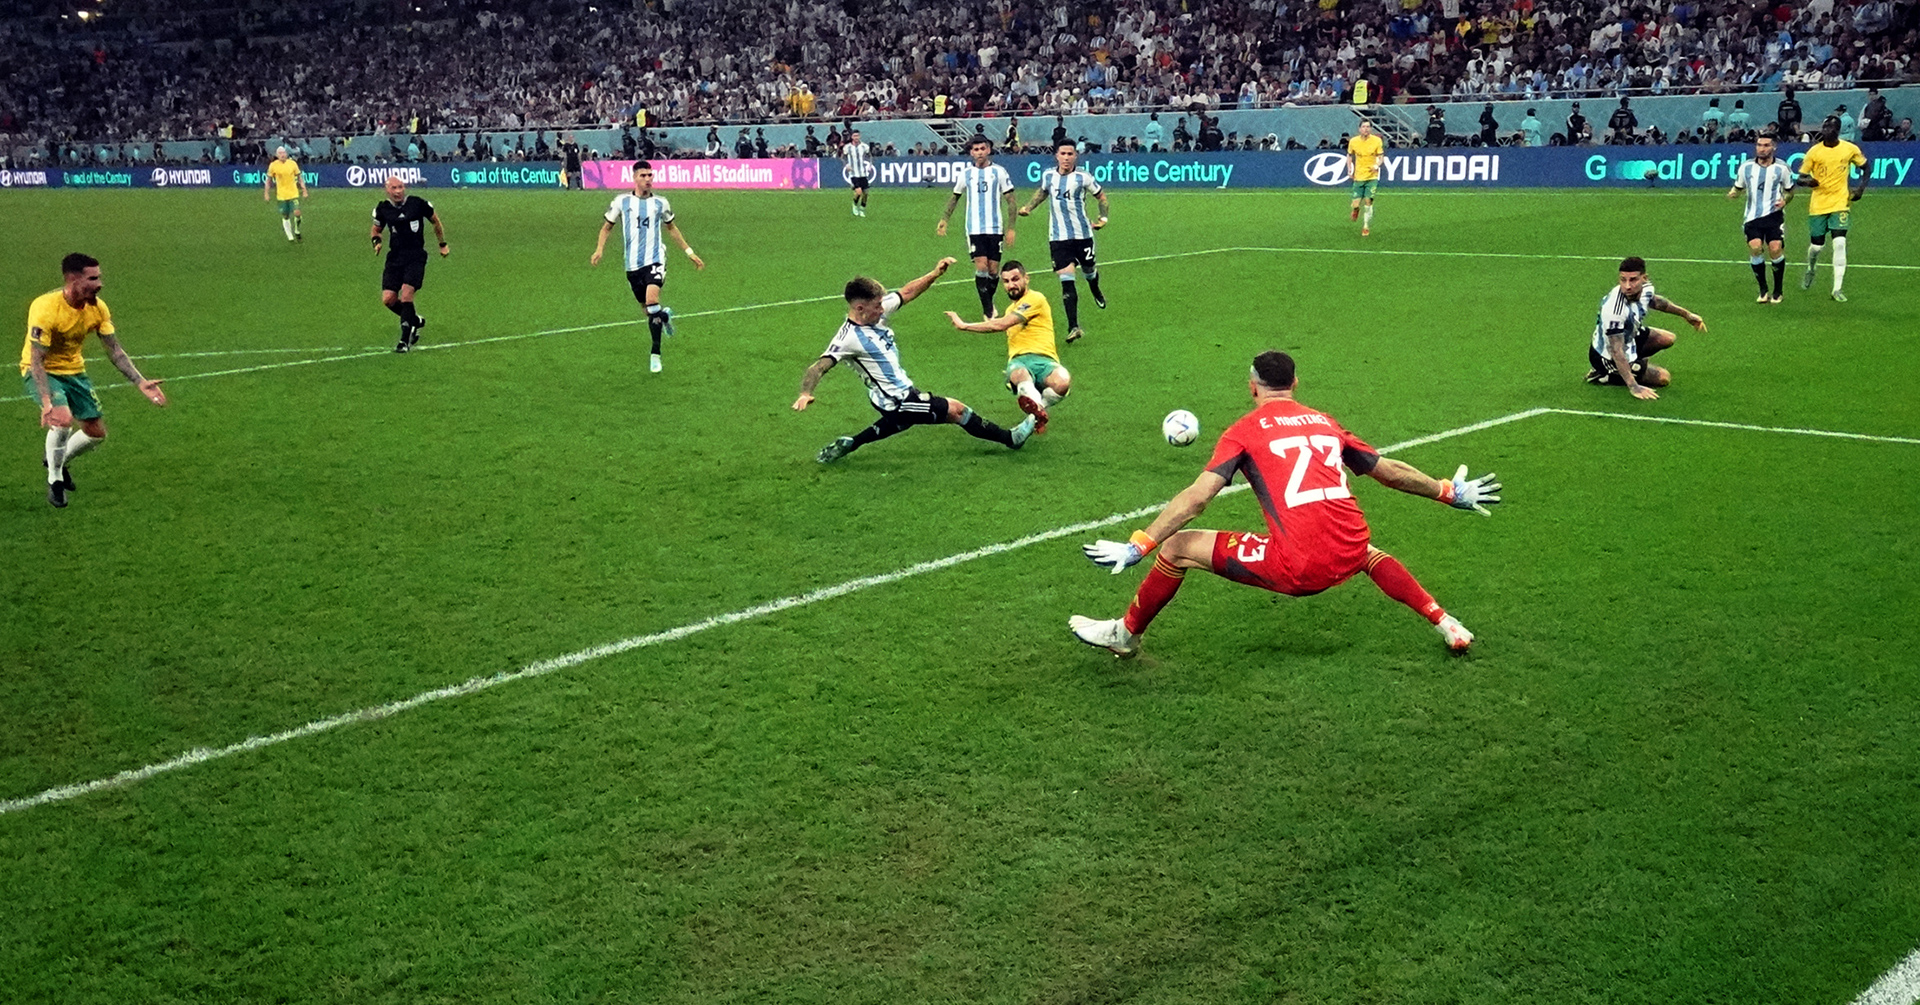 Aziz Behich narrowly misses the chance to equalise against Argentina